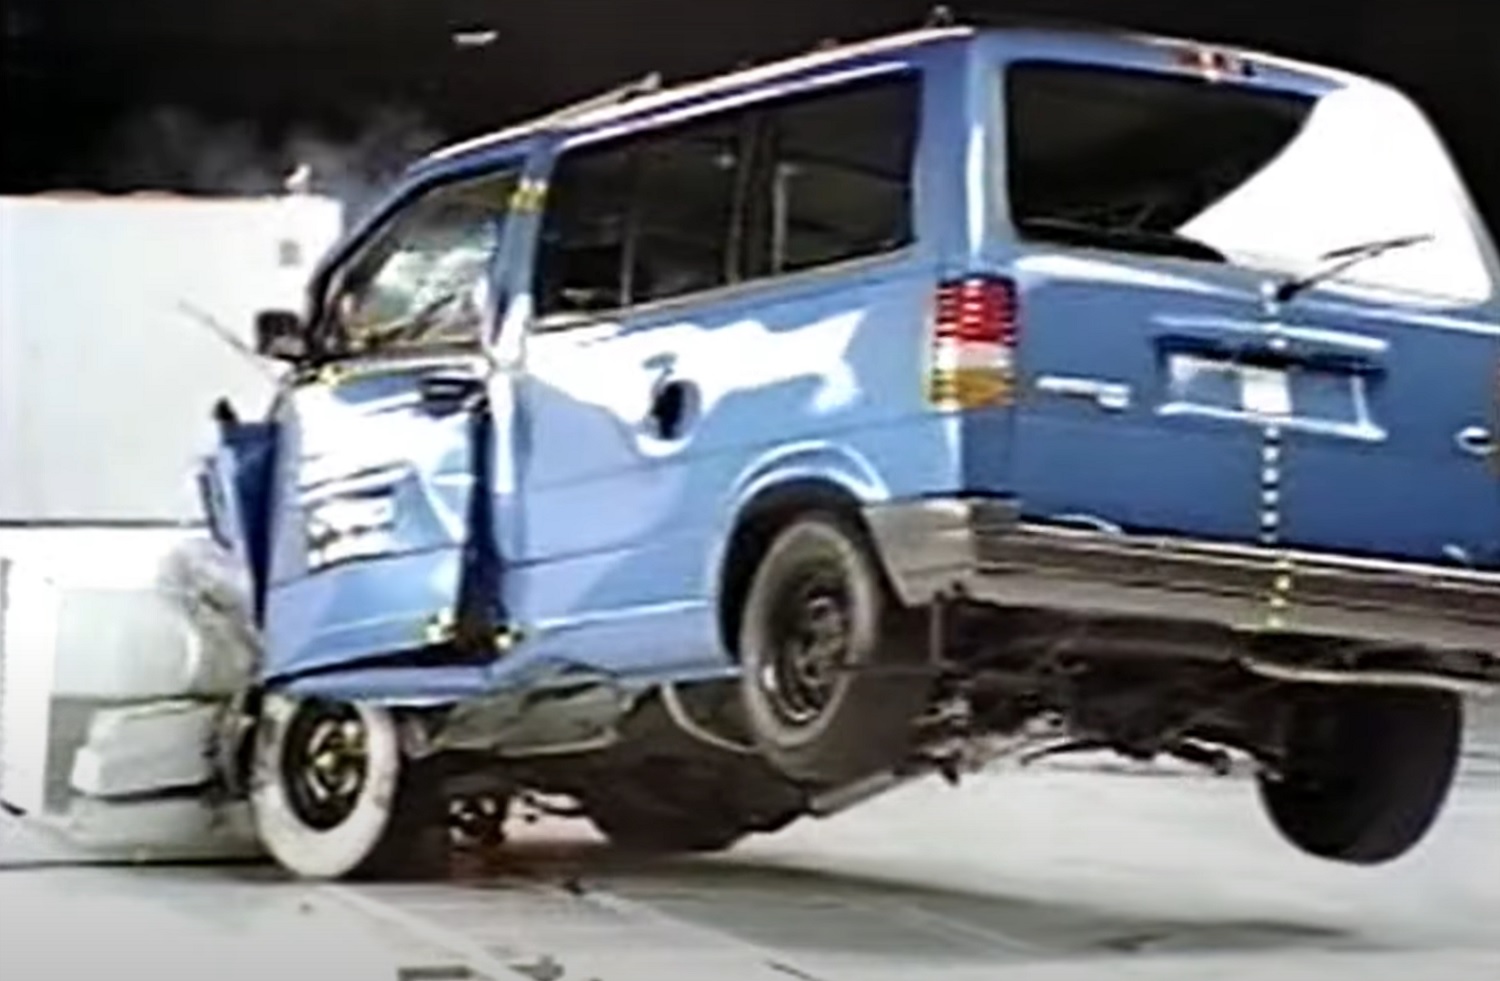 1996 Ford Aerostar Crash Test Shows How Far Safety Has Come: Video